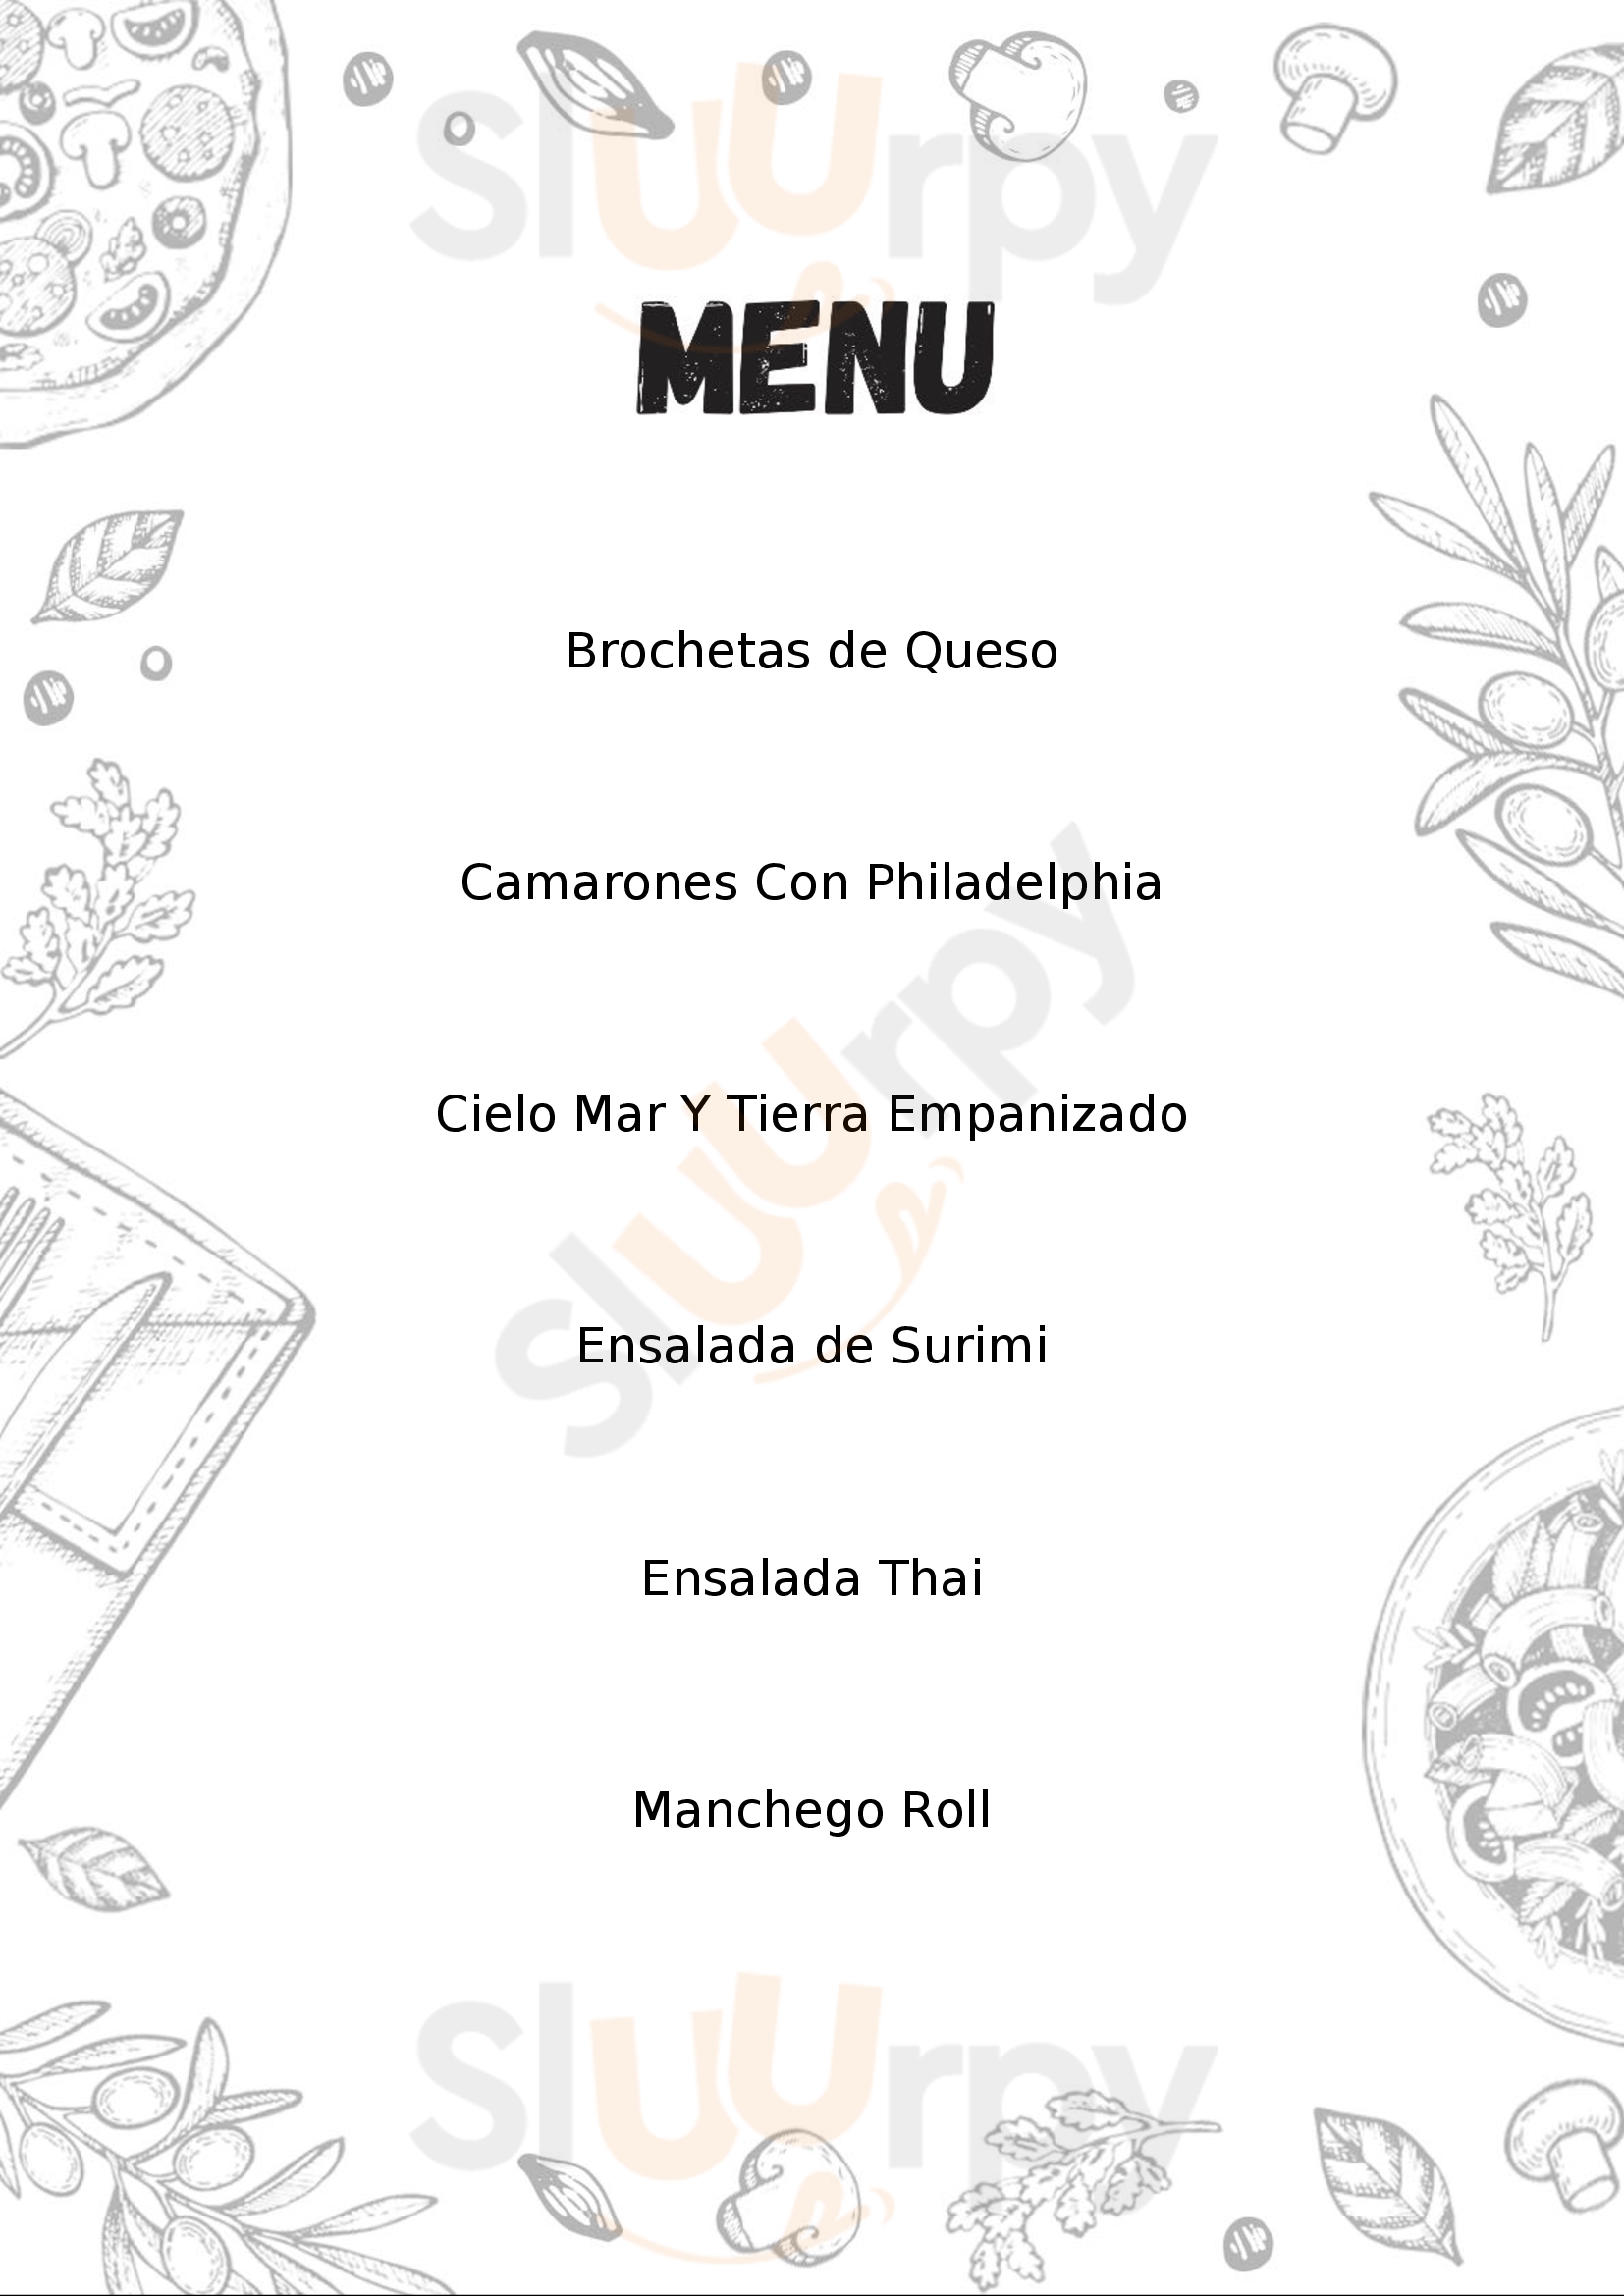 Sushi Bar & Delivery Justo Sierra Mexicali Menu - 1